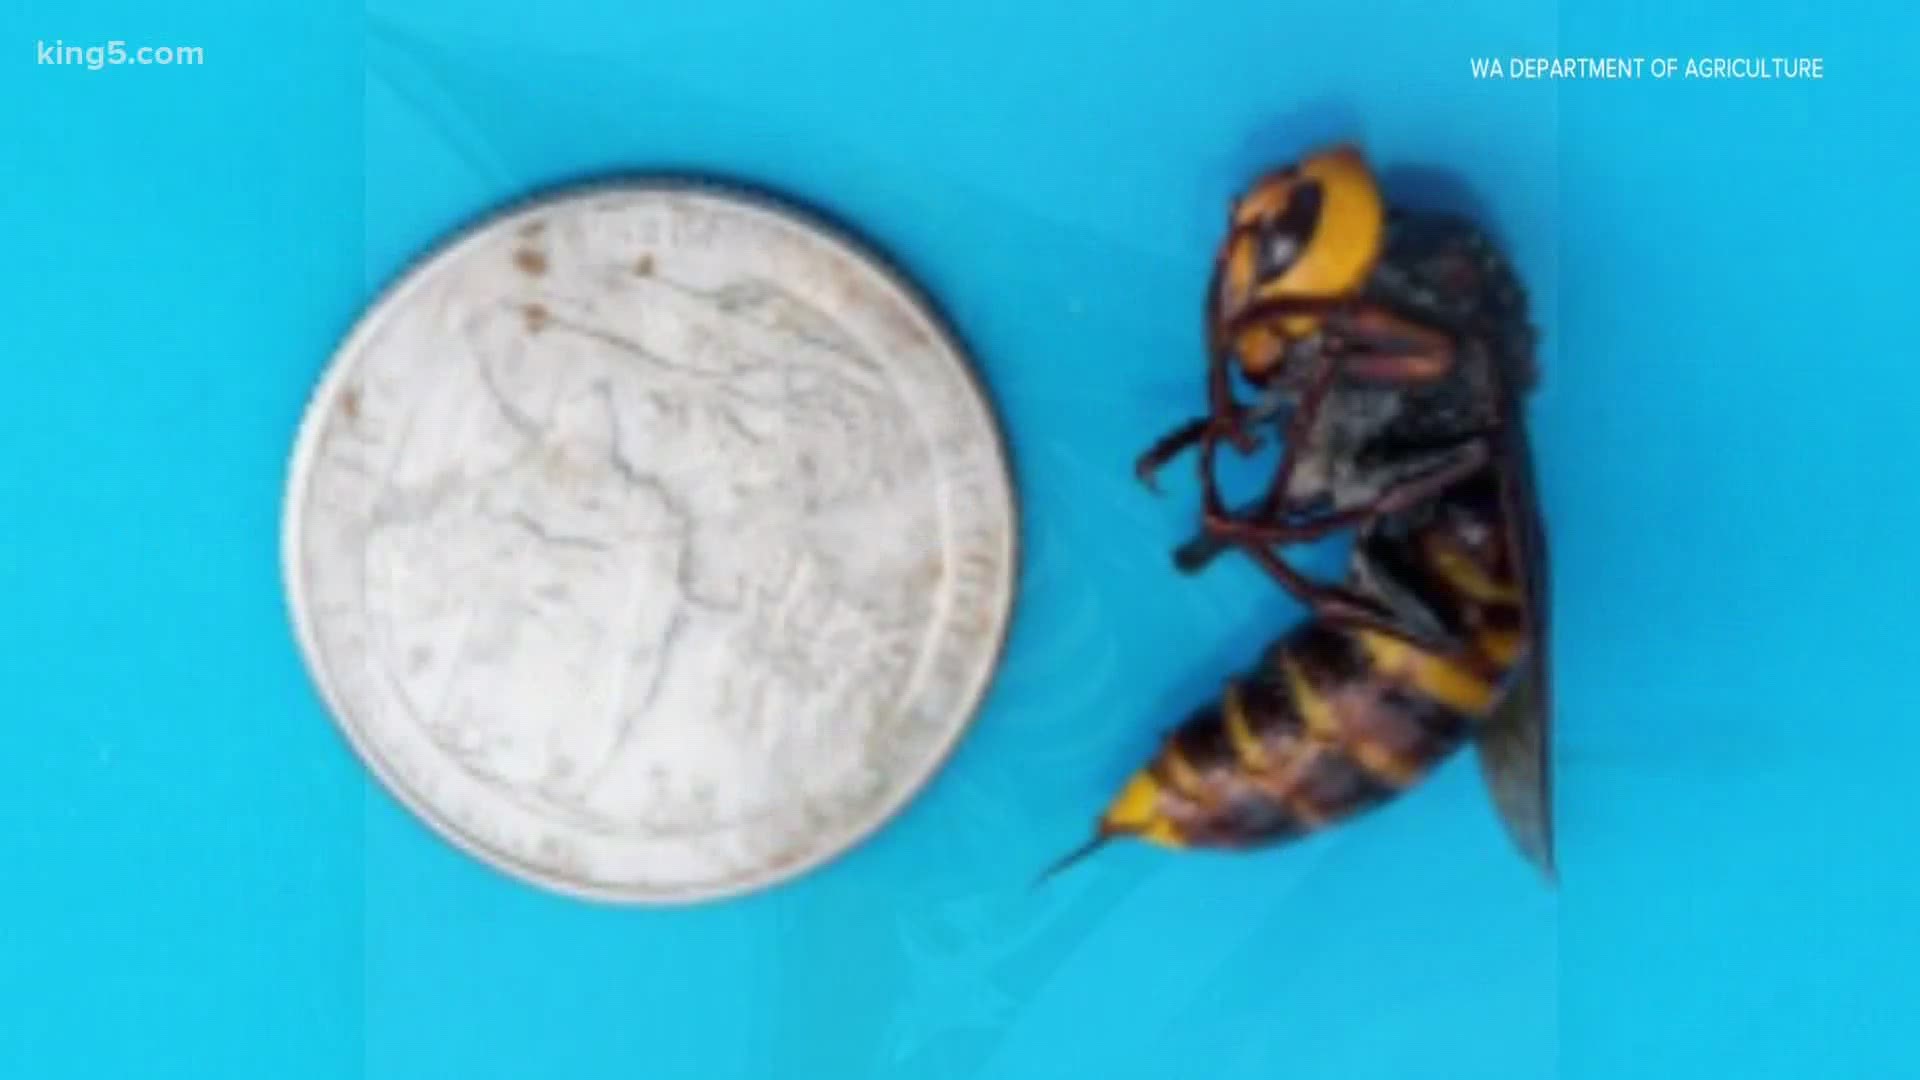 The worker Asian giant hornet was found dead in a trap in Birch Bay on Aug. 19.